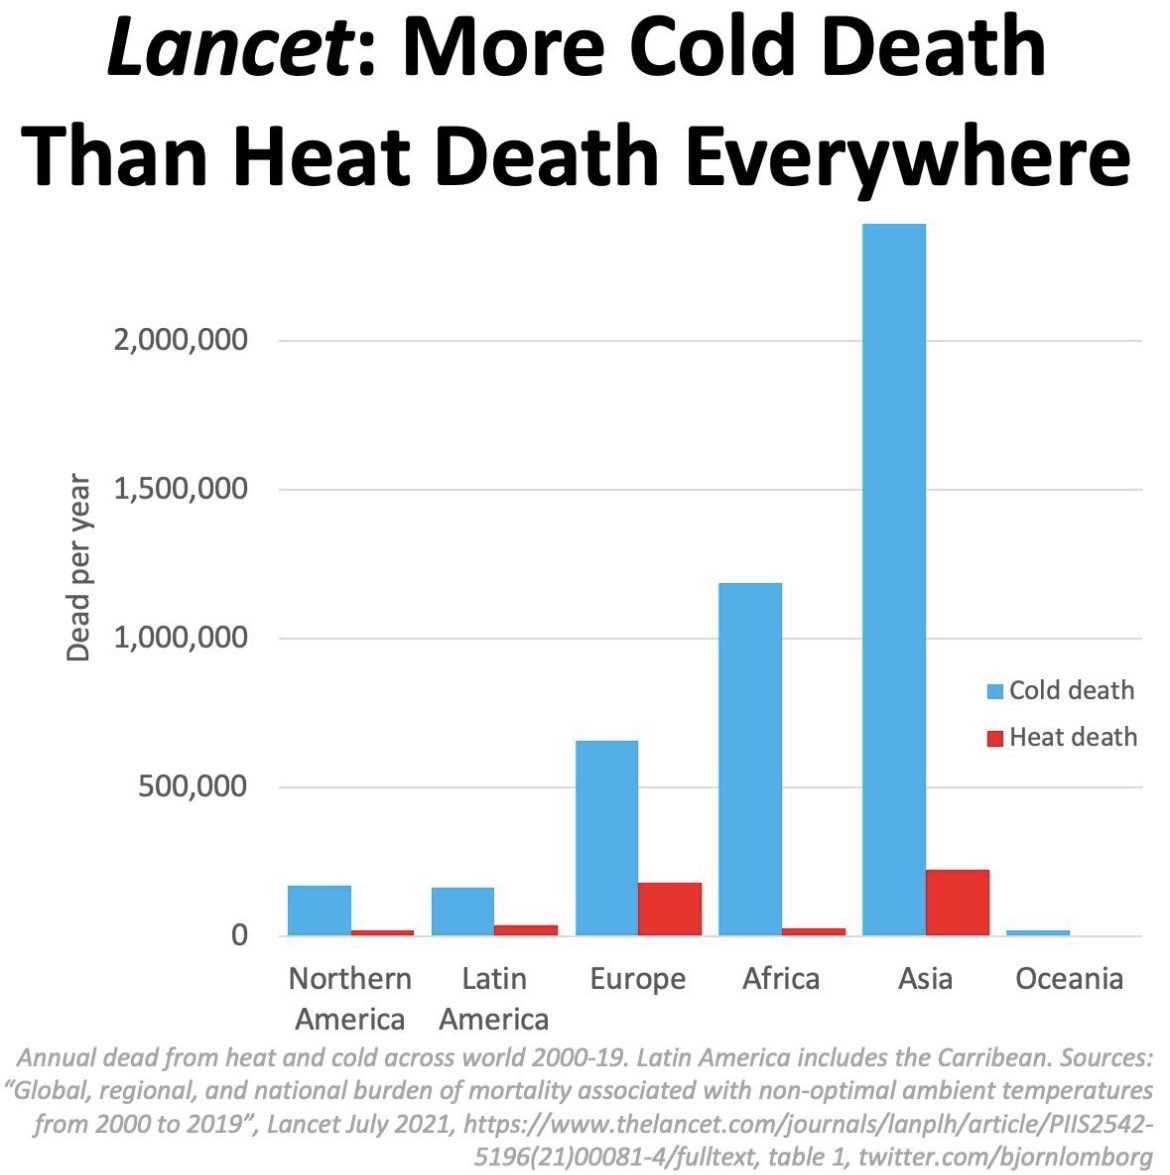 ⬆️⬇️

❗️The greater the damage of the roof, the more beautiful the view of the stars❗️

People who believe in PCR deaths tend to believe also in CO2 deaths.

Cold kills much more than heat on every continent, even in Africa. Yet, most reporting focuses on heat deaths, because it